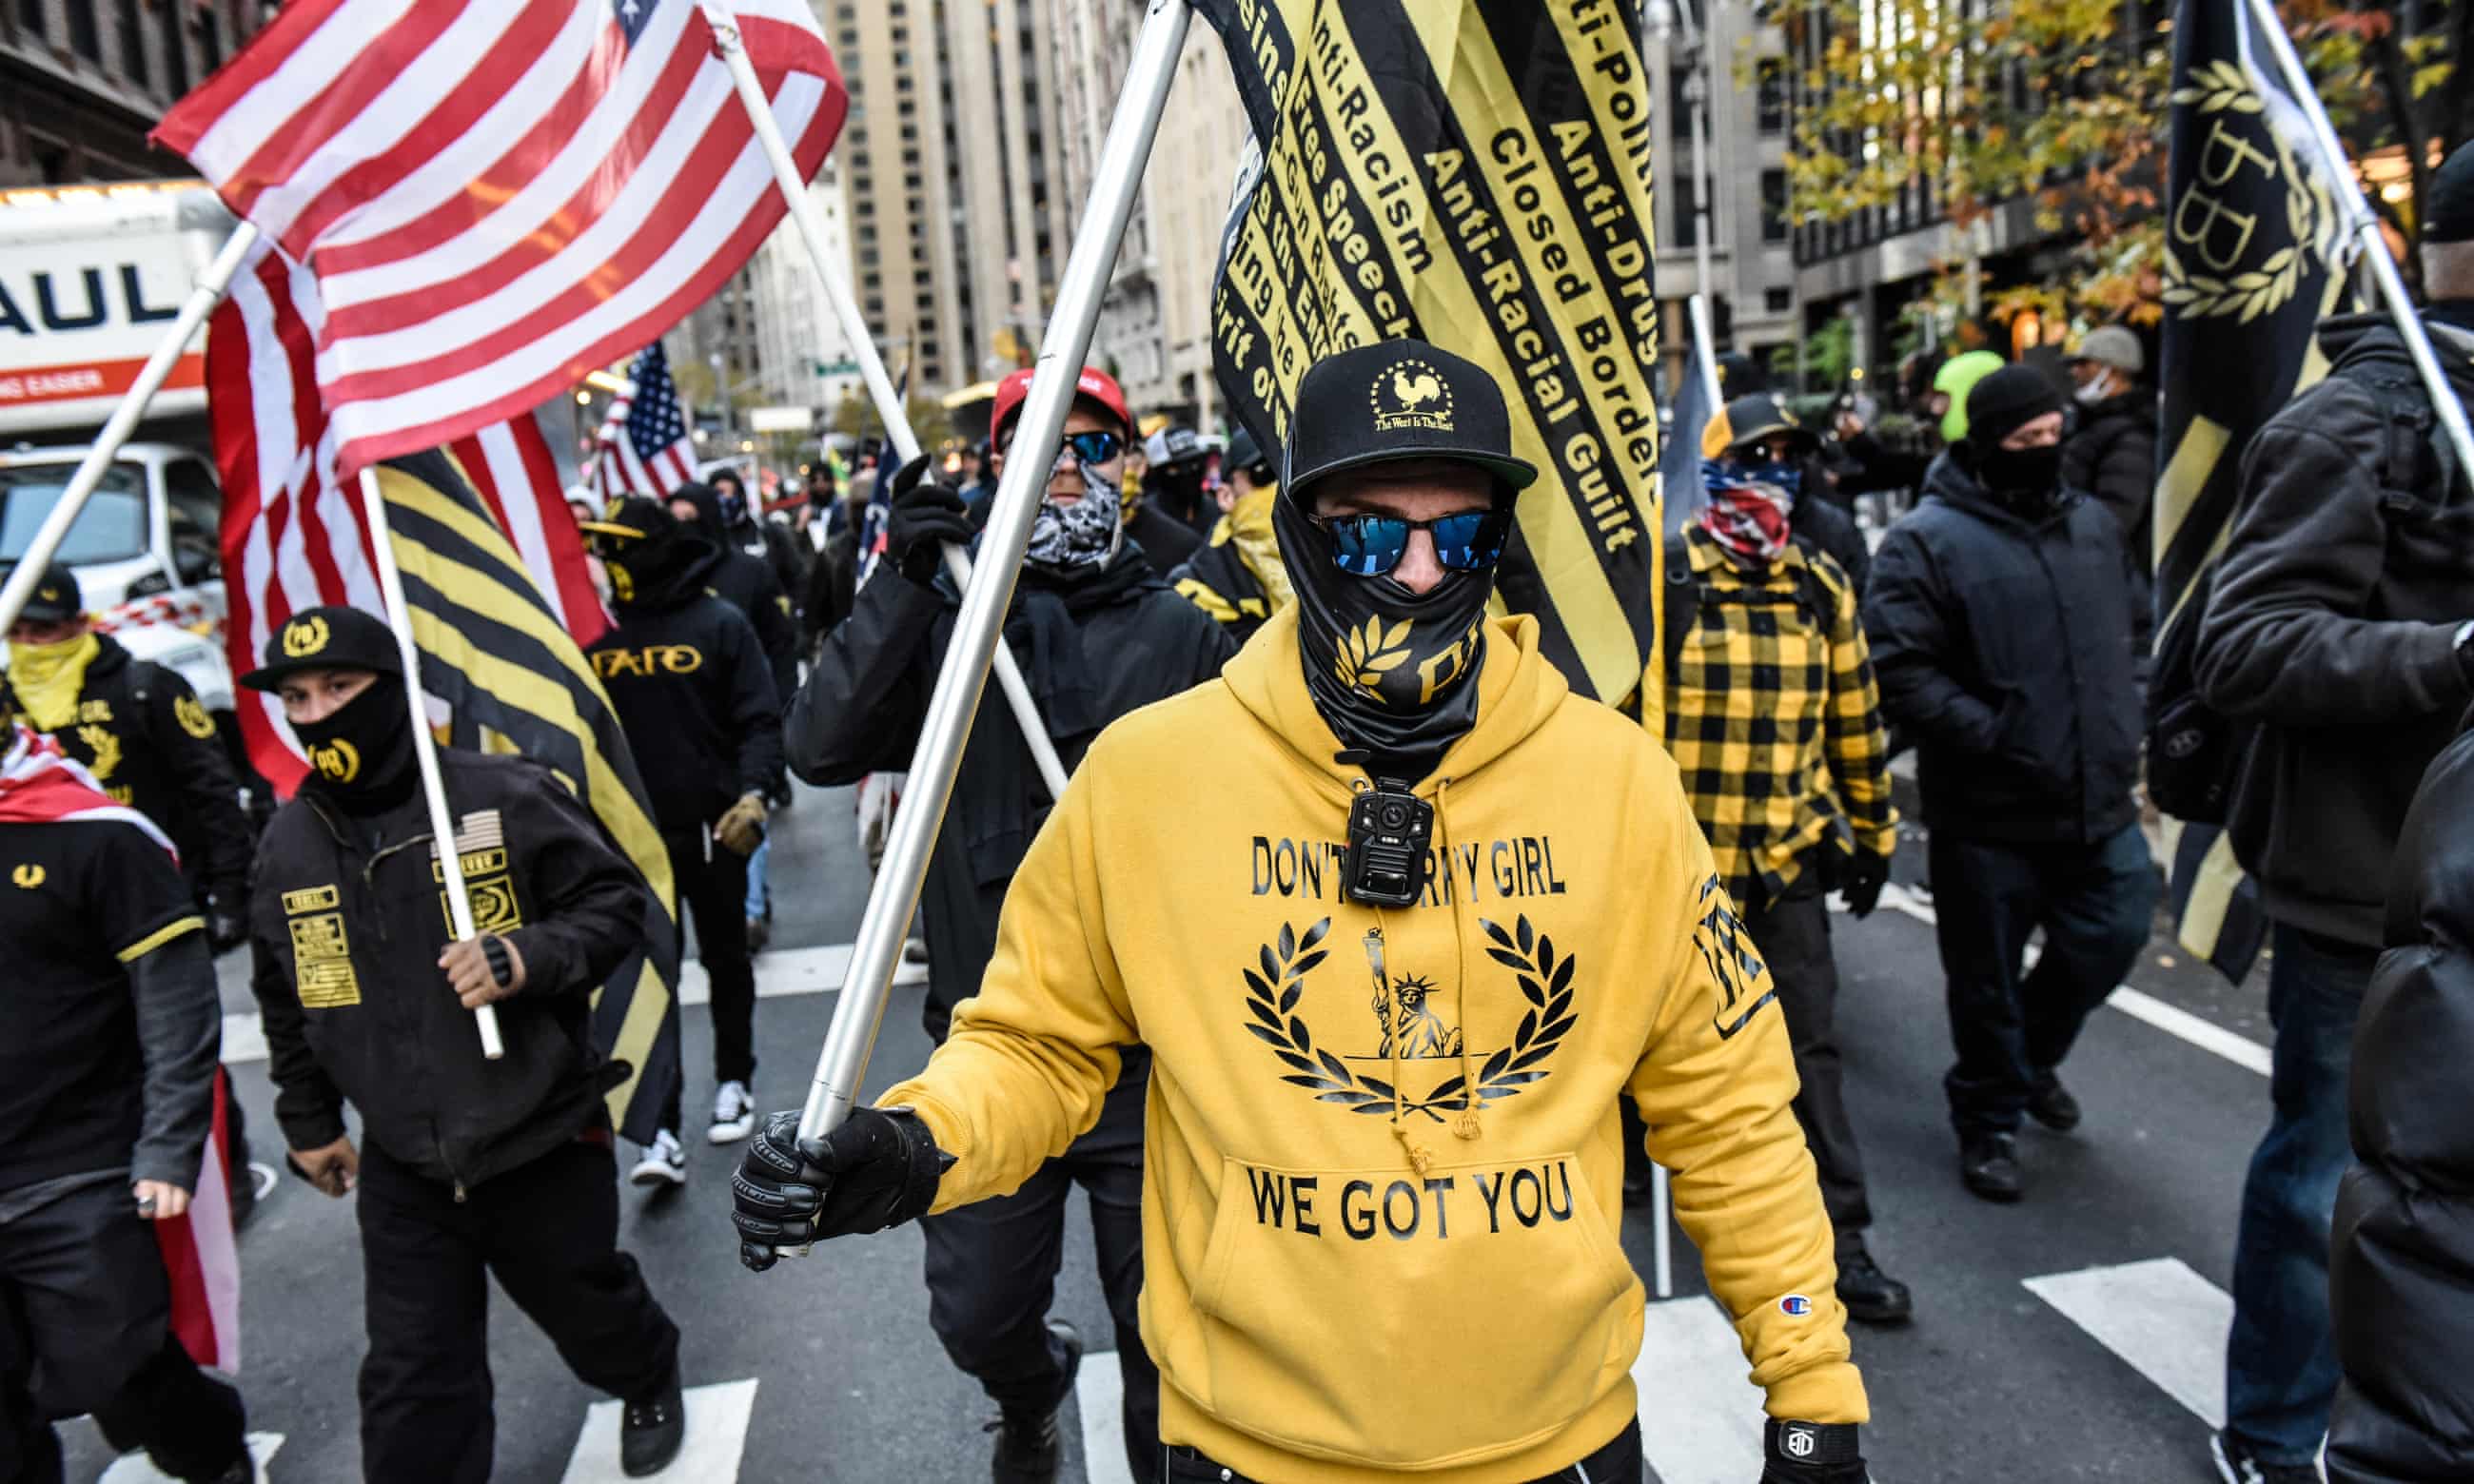 Proud Boys memo reveals meticulous planning for ‘street-level violence’ (theguardian.com)